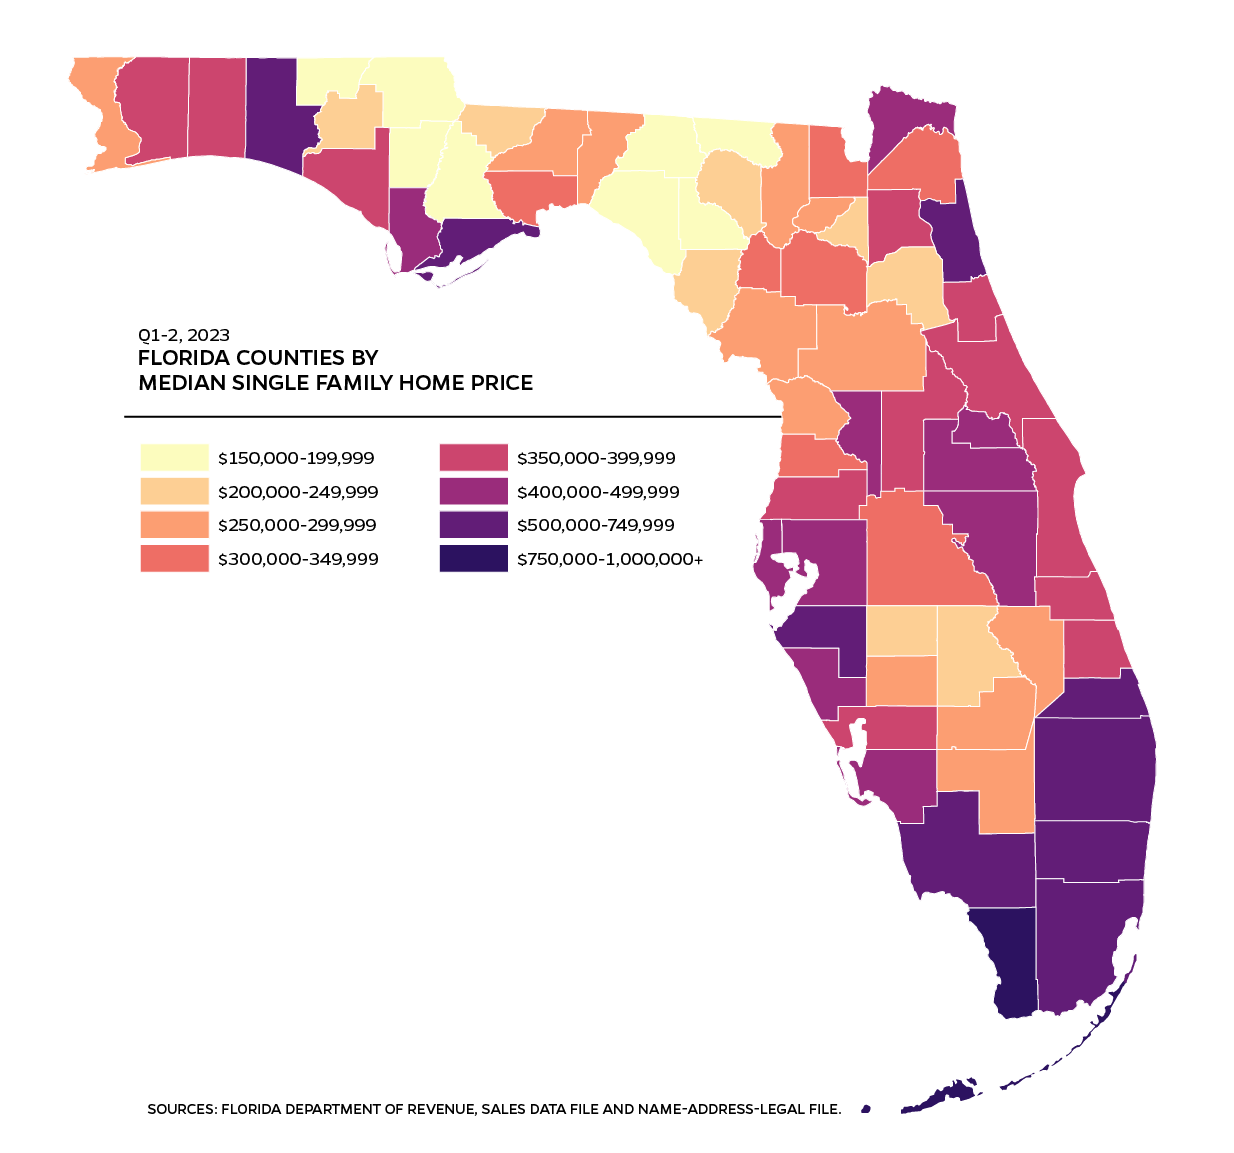 Florida counties by median single family home price.